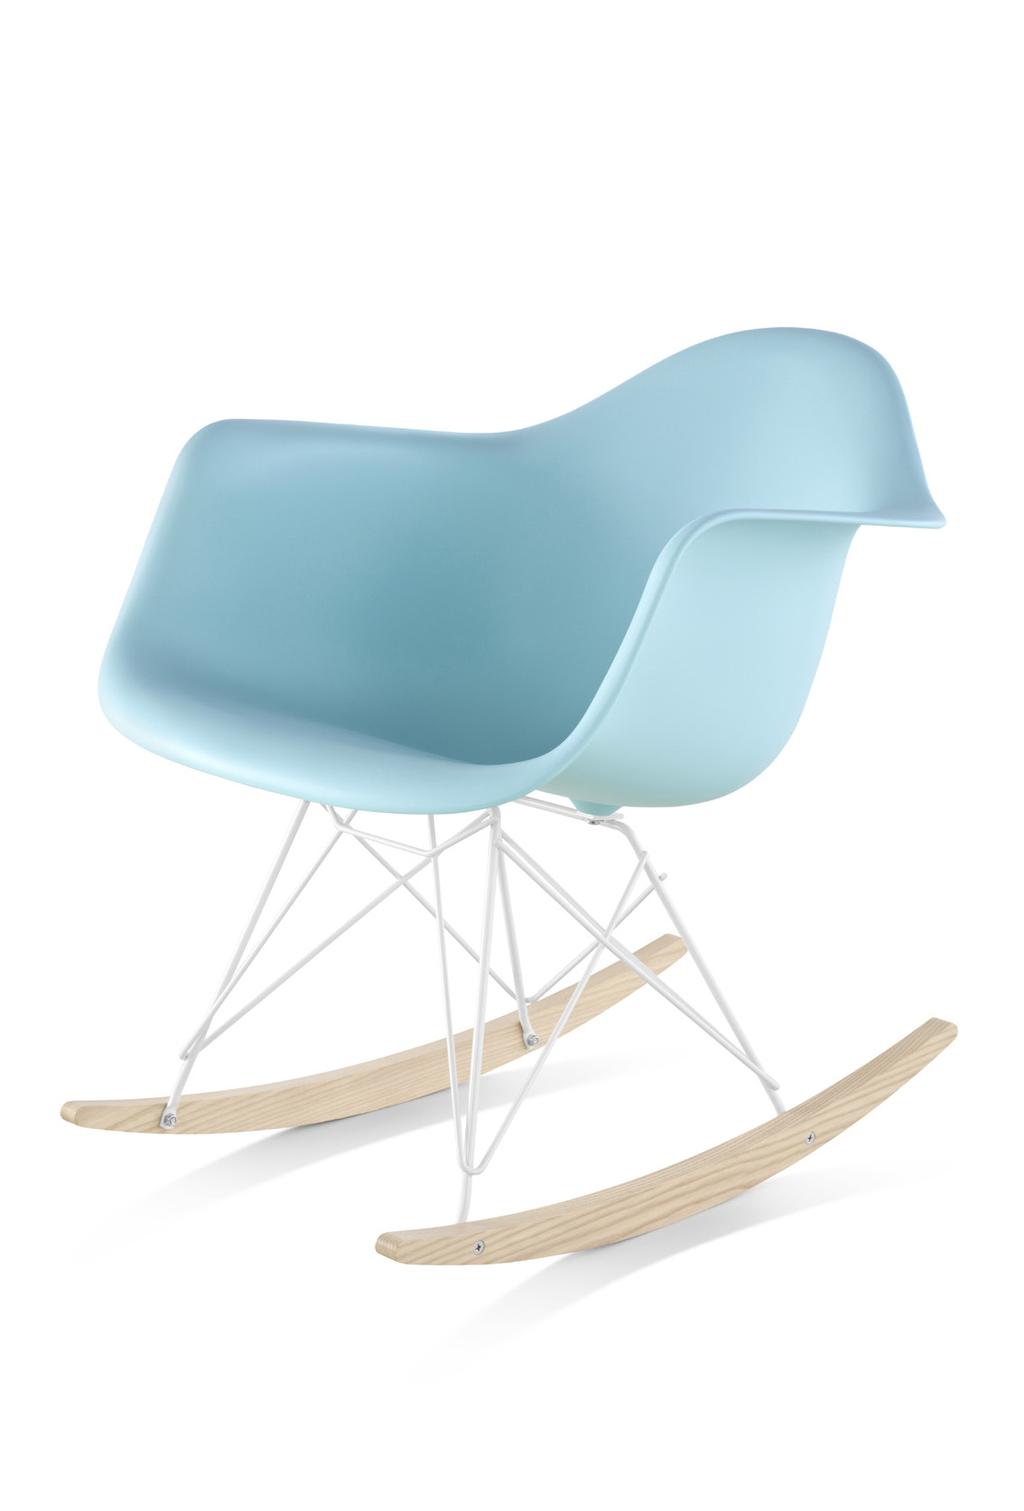 Eames Molded Plastic Armchair Rocker Base 8-16% recycled content; 84% recyclable Charles Eames said The role of the designer is that of a very good, thoughtful host anticipating the needs of his